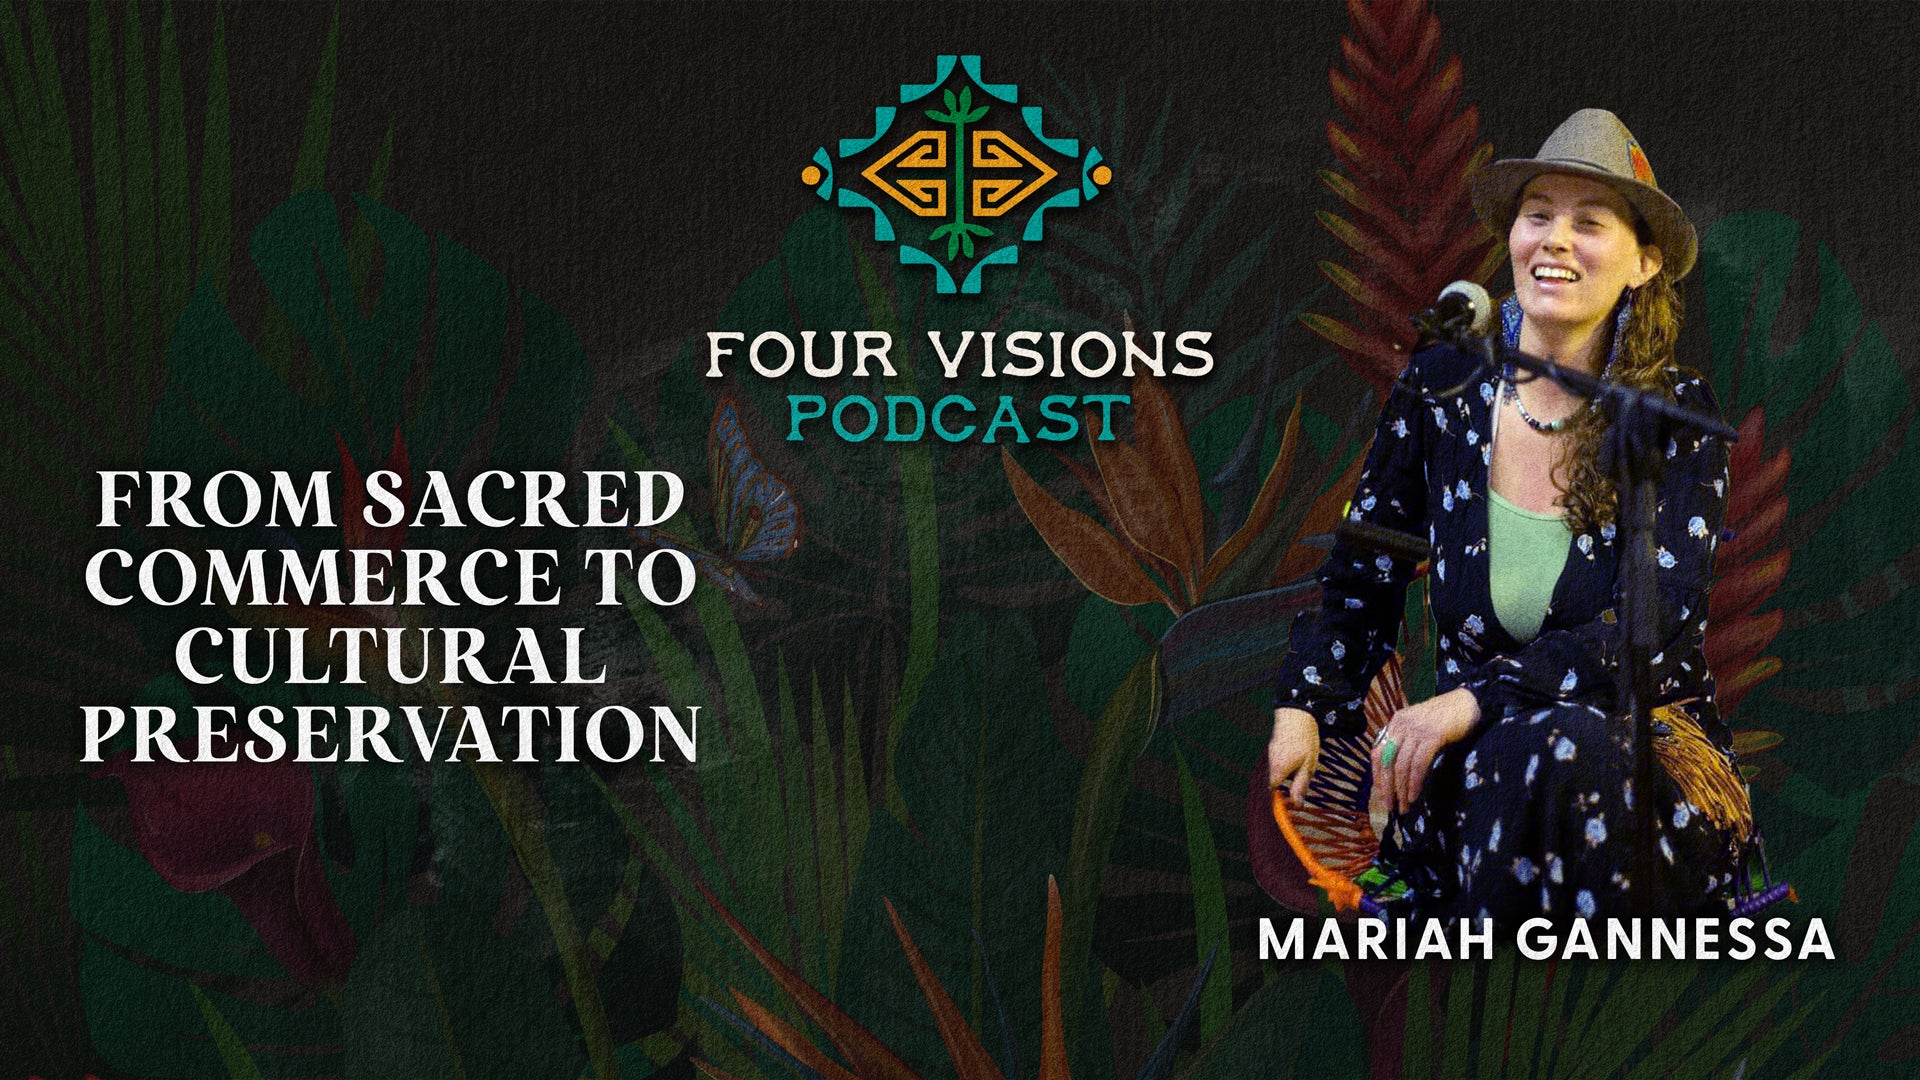 36 - From Sacred Commerce to Cultural Preservation: Four Visions' Impactful Journey